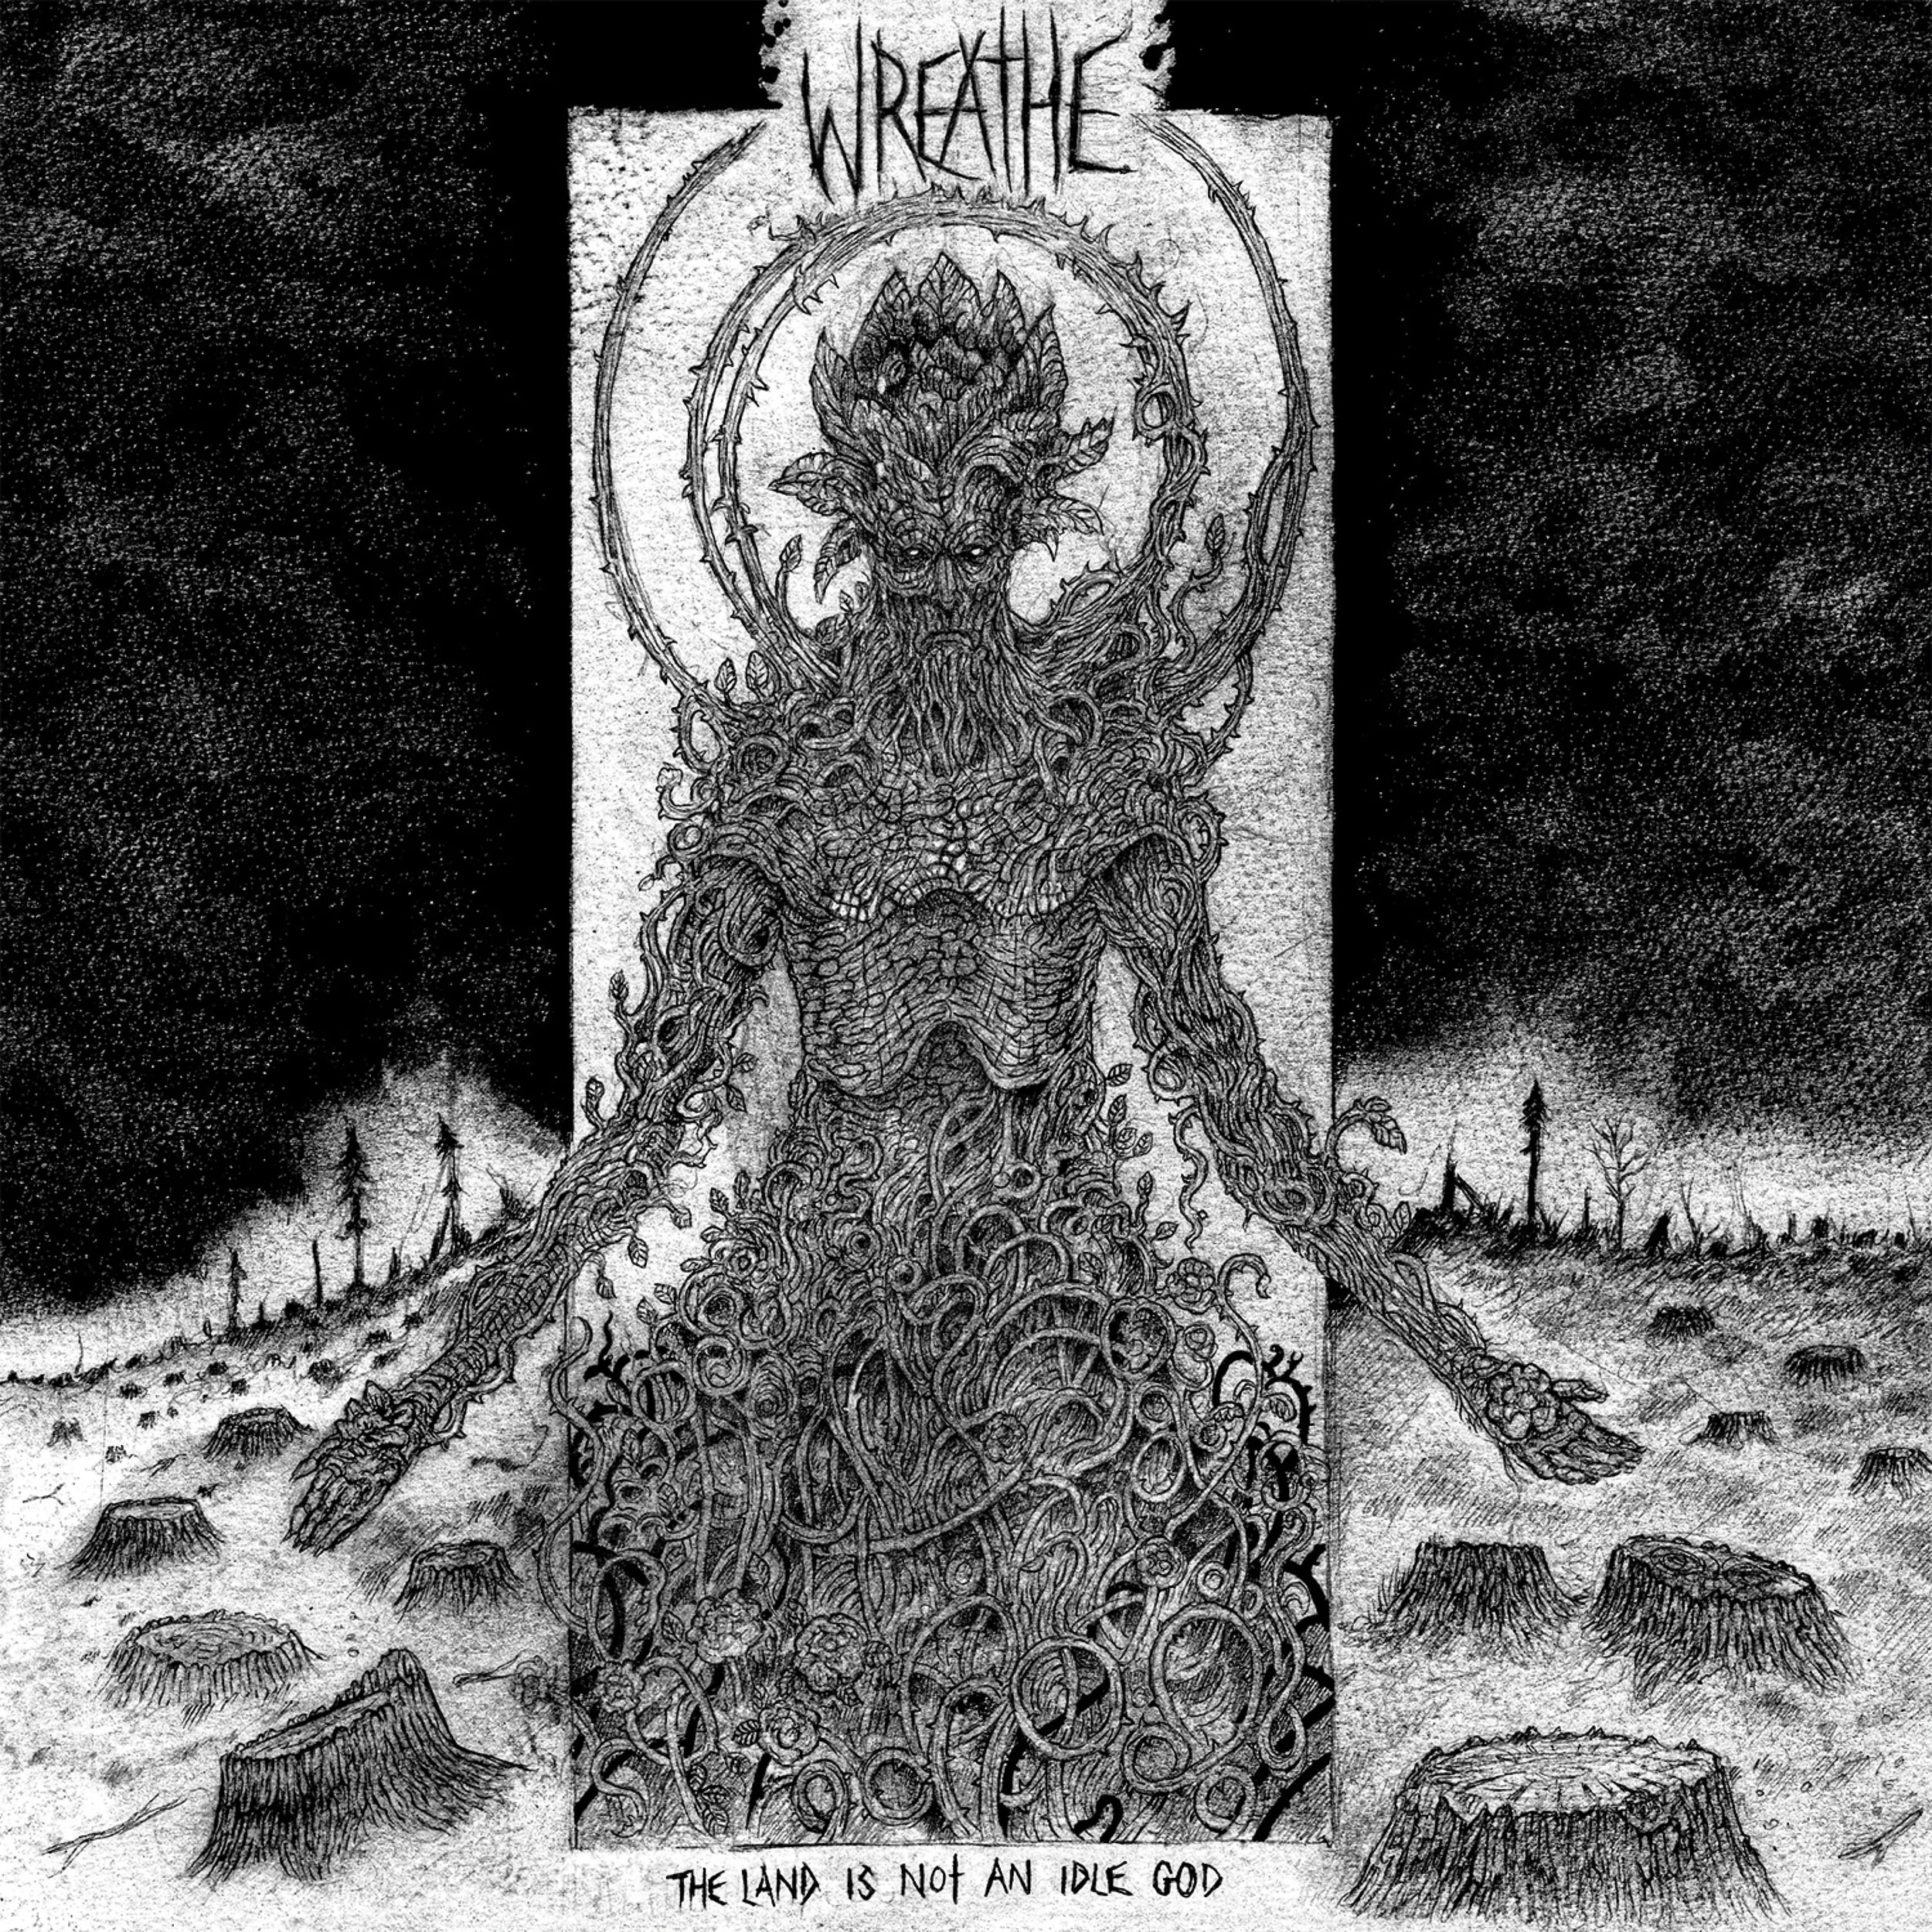 Wreathe - The Land Is Not An Idle God - Cover.jpg